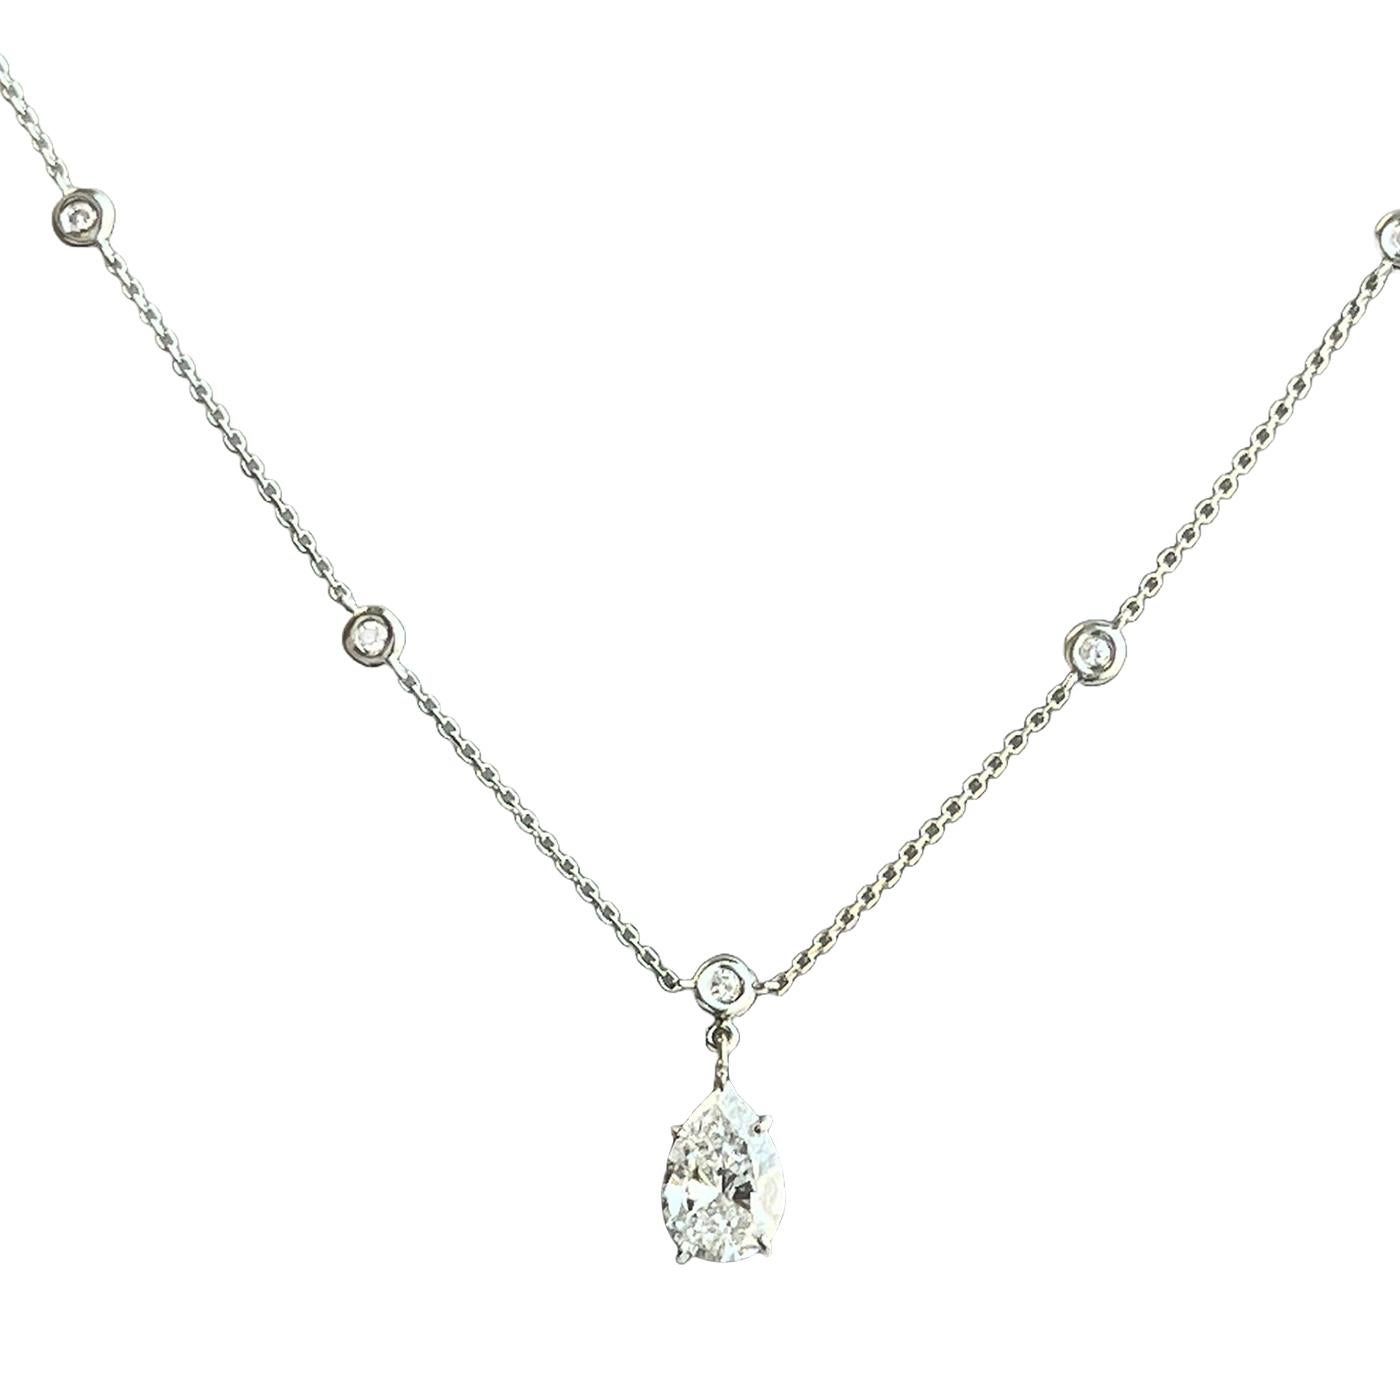 This exquisite pendant necklace with a pear-shaped diamond by the Yard in 14k white gold is both elegant and feminine. The 1.56ct carat pear-shaped center diamonds in this necklace come with 0.55ct on each (13 side stones) round diamonds. This